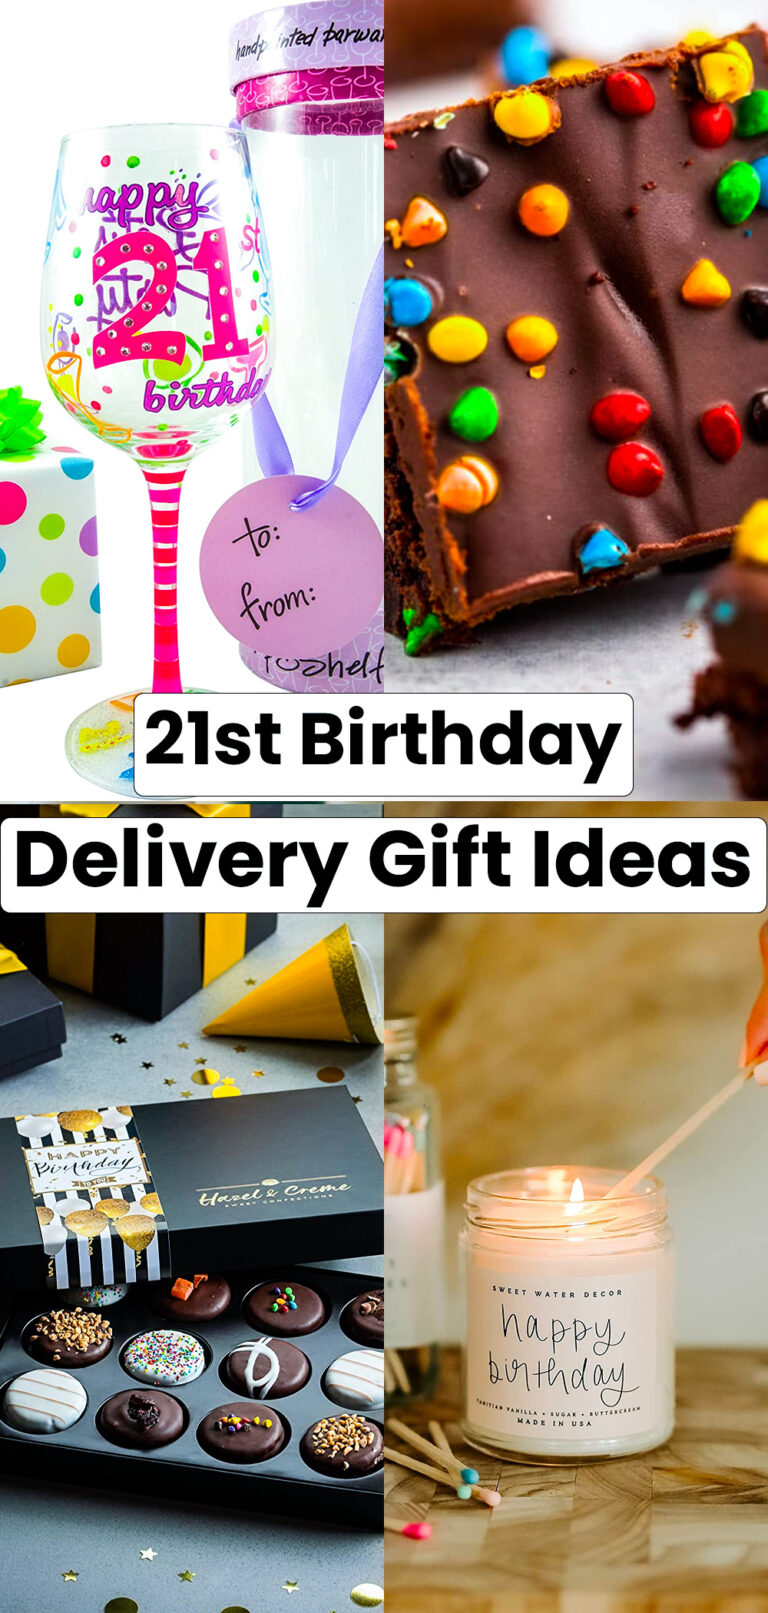 21st Birthday Delivery Gift Ideas